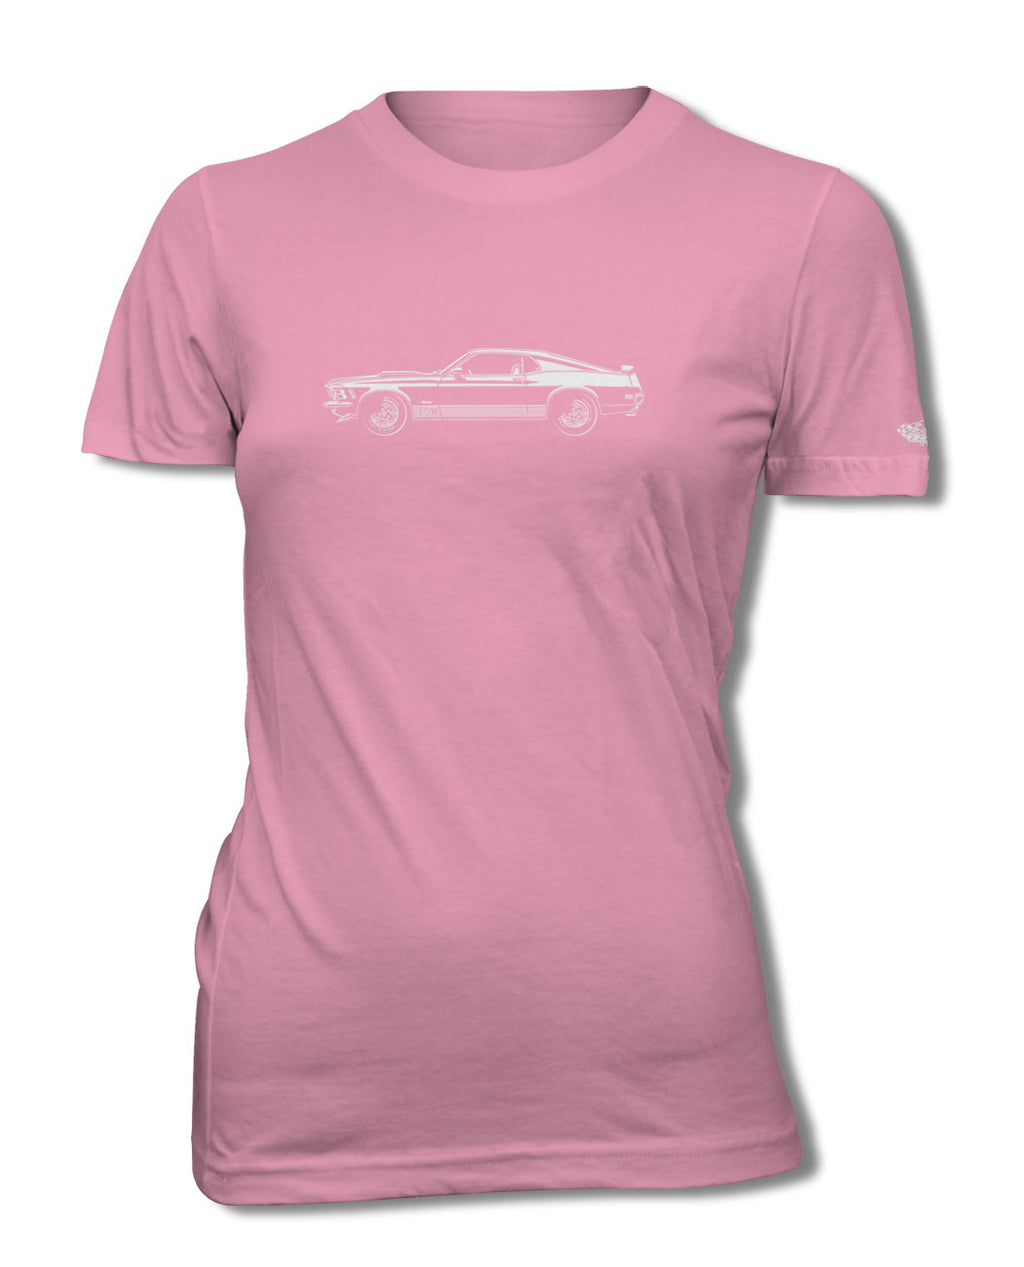 1970 Ford Mustang Mach 1 Fastback T-Shirt - Women - Side View